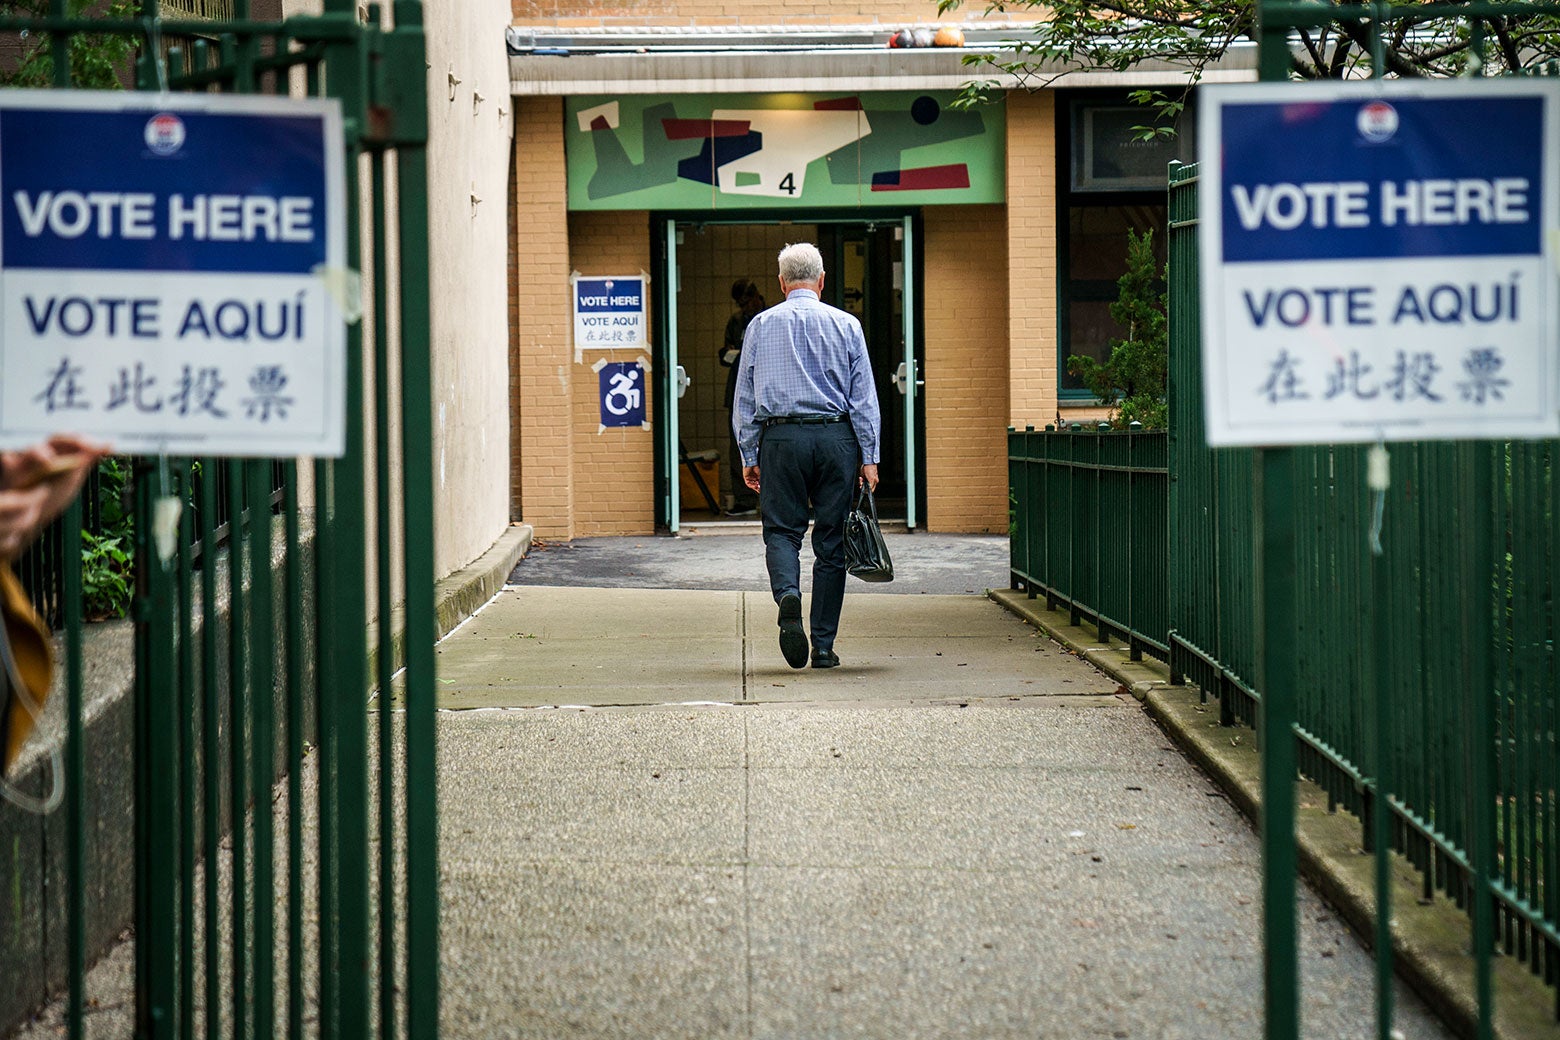 A voter enters a Brooklyn polling station on Thursday to vote in New York state’s primary election. The signs saying "vote here" are listed in English, Spanish, and Japanese.